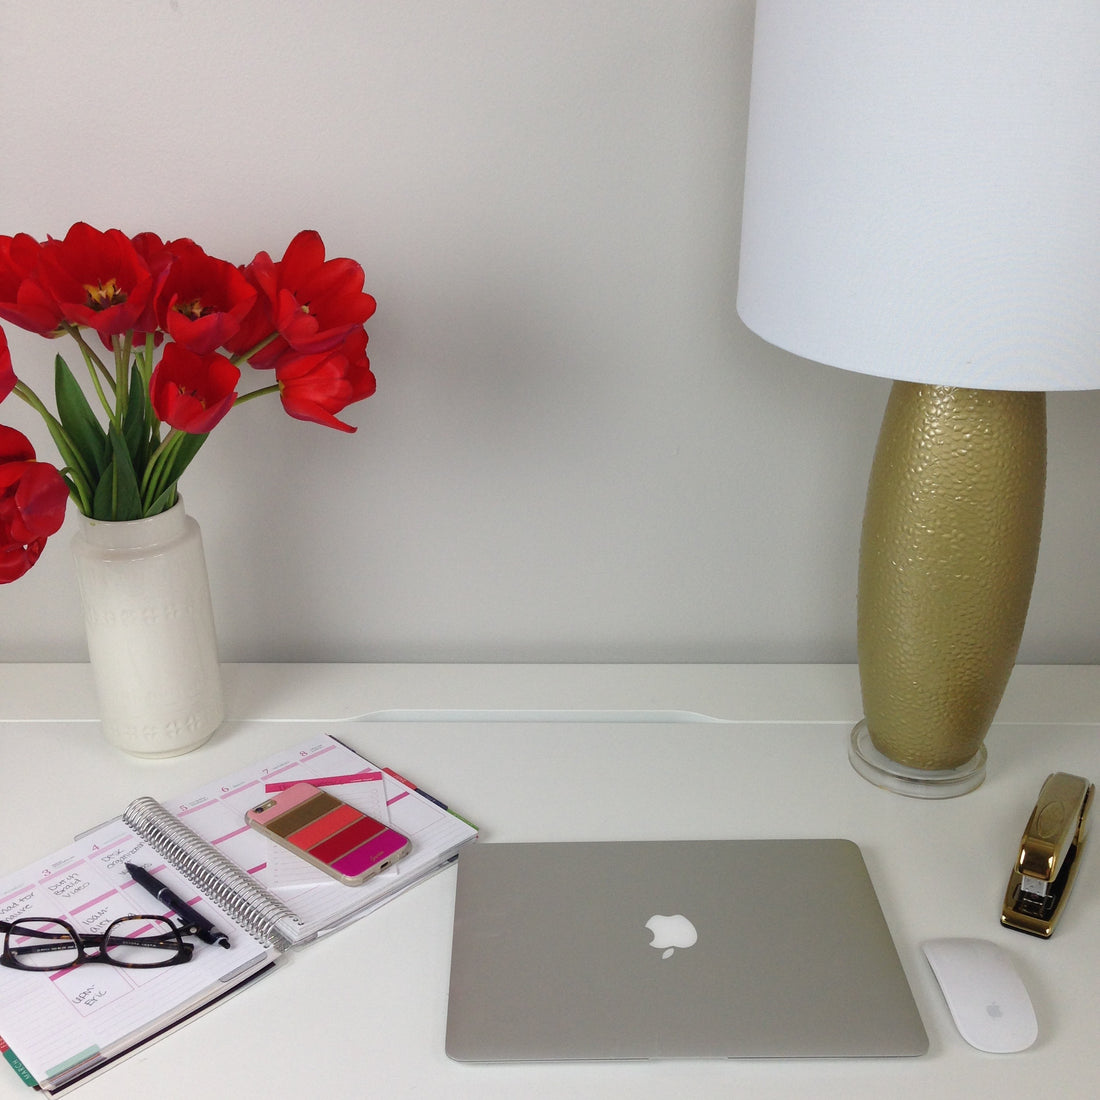 5 Tips to Staying Productive While Working from Home